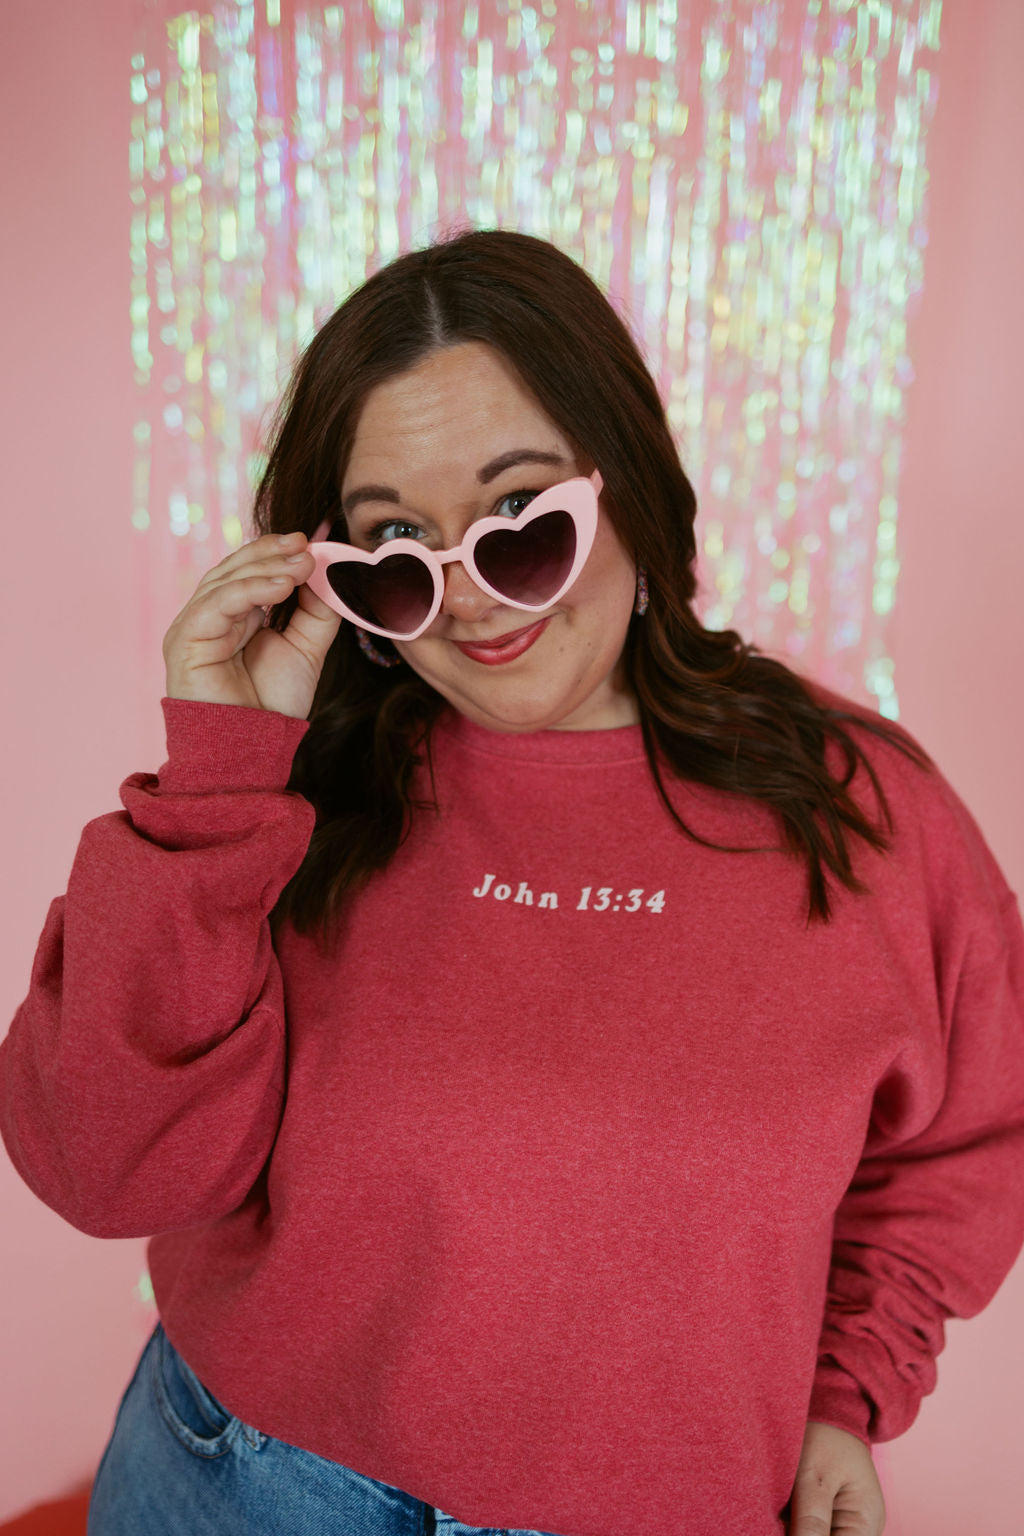 Load image into Gallery viewer, Love One Another | Adult Pullover-Adult Pullover-Sister Shirts-Sister Shirts, Cute &amp;amp; Custom Tees for Mama &amp;amp; Littles in Trussville, Alabama.
